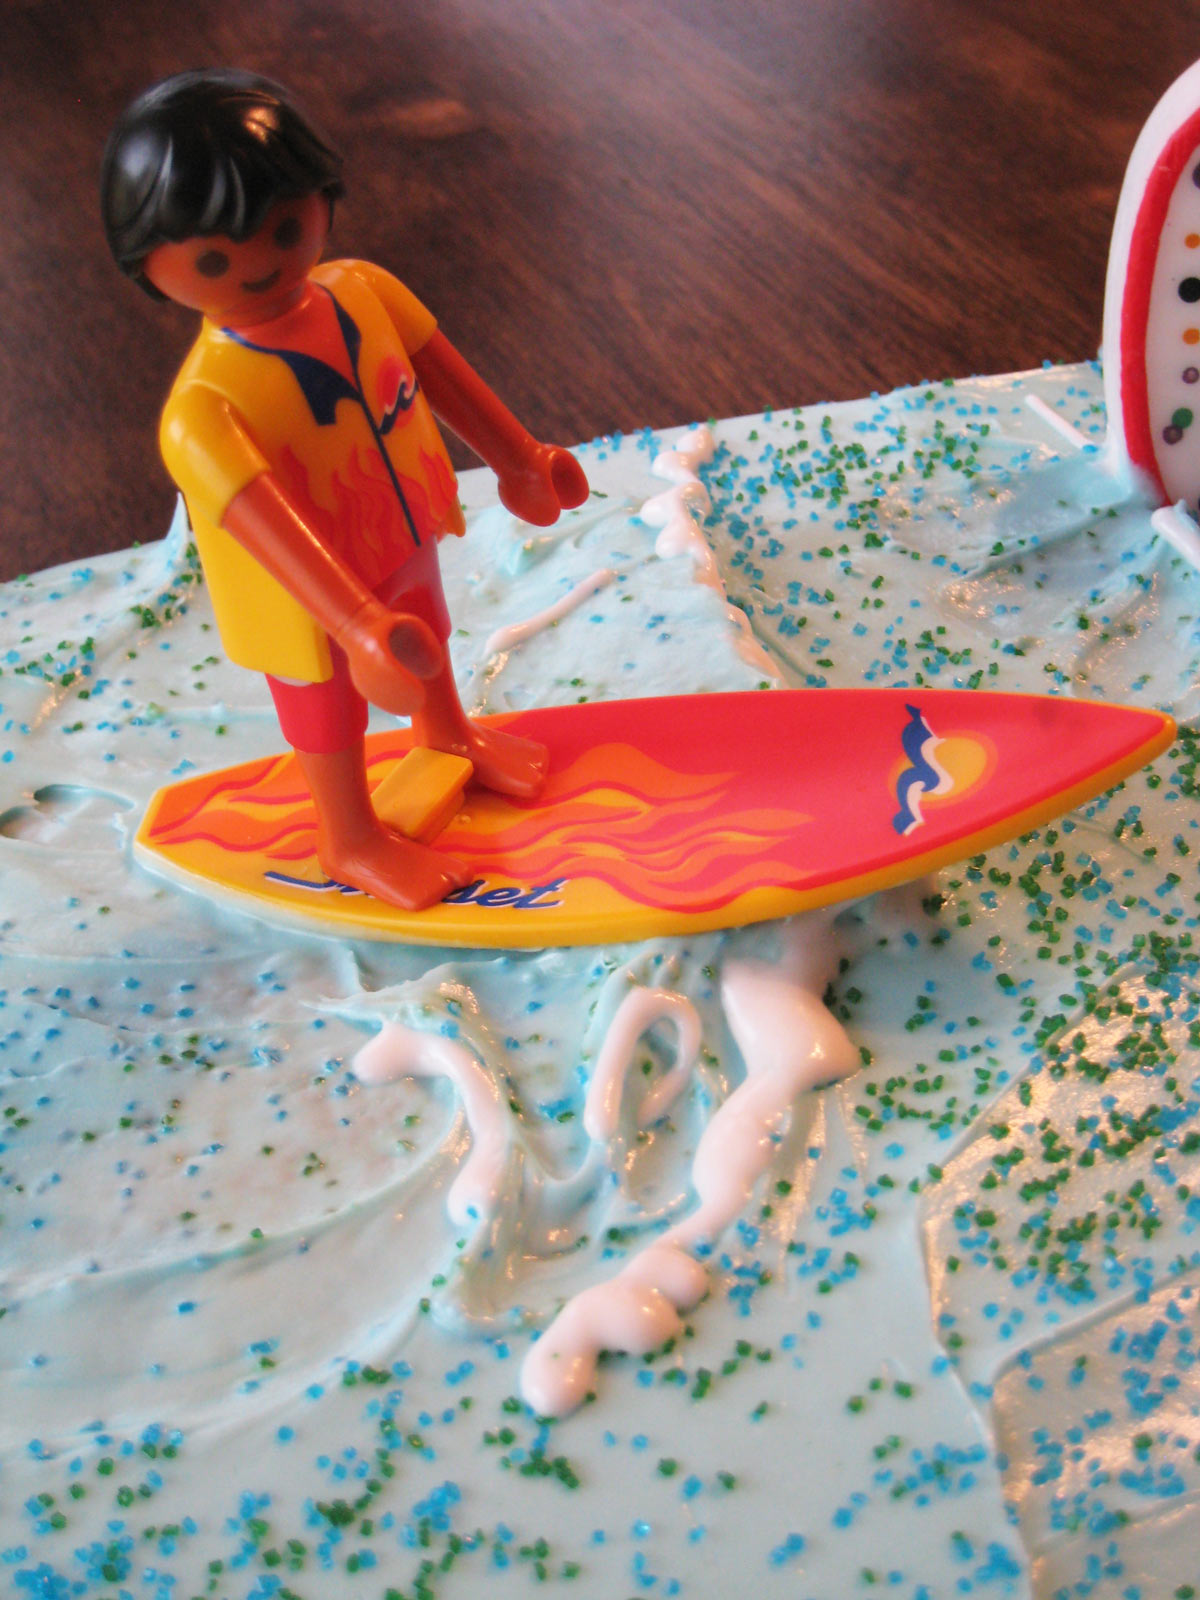 close up of toy surfer atop frosting wave on cake.